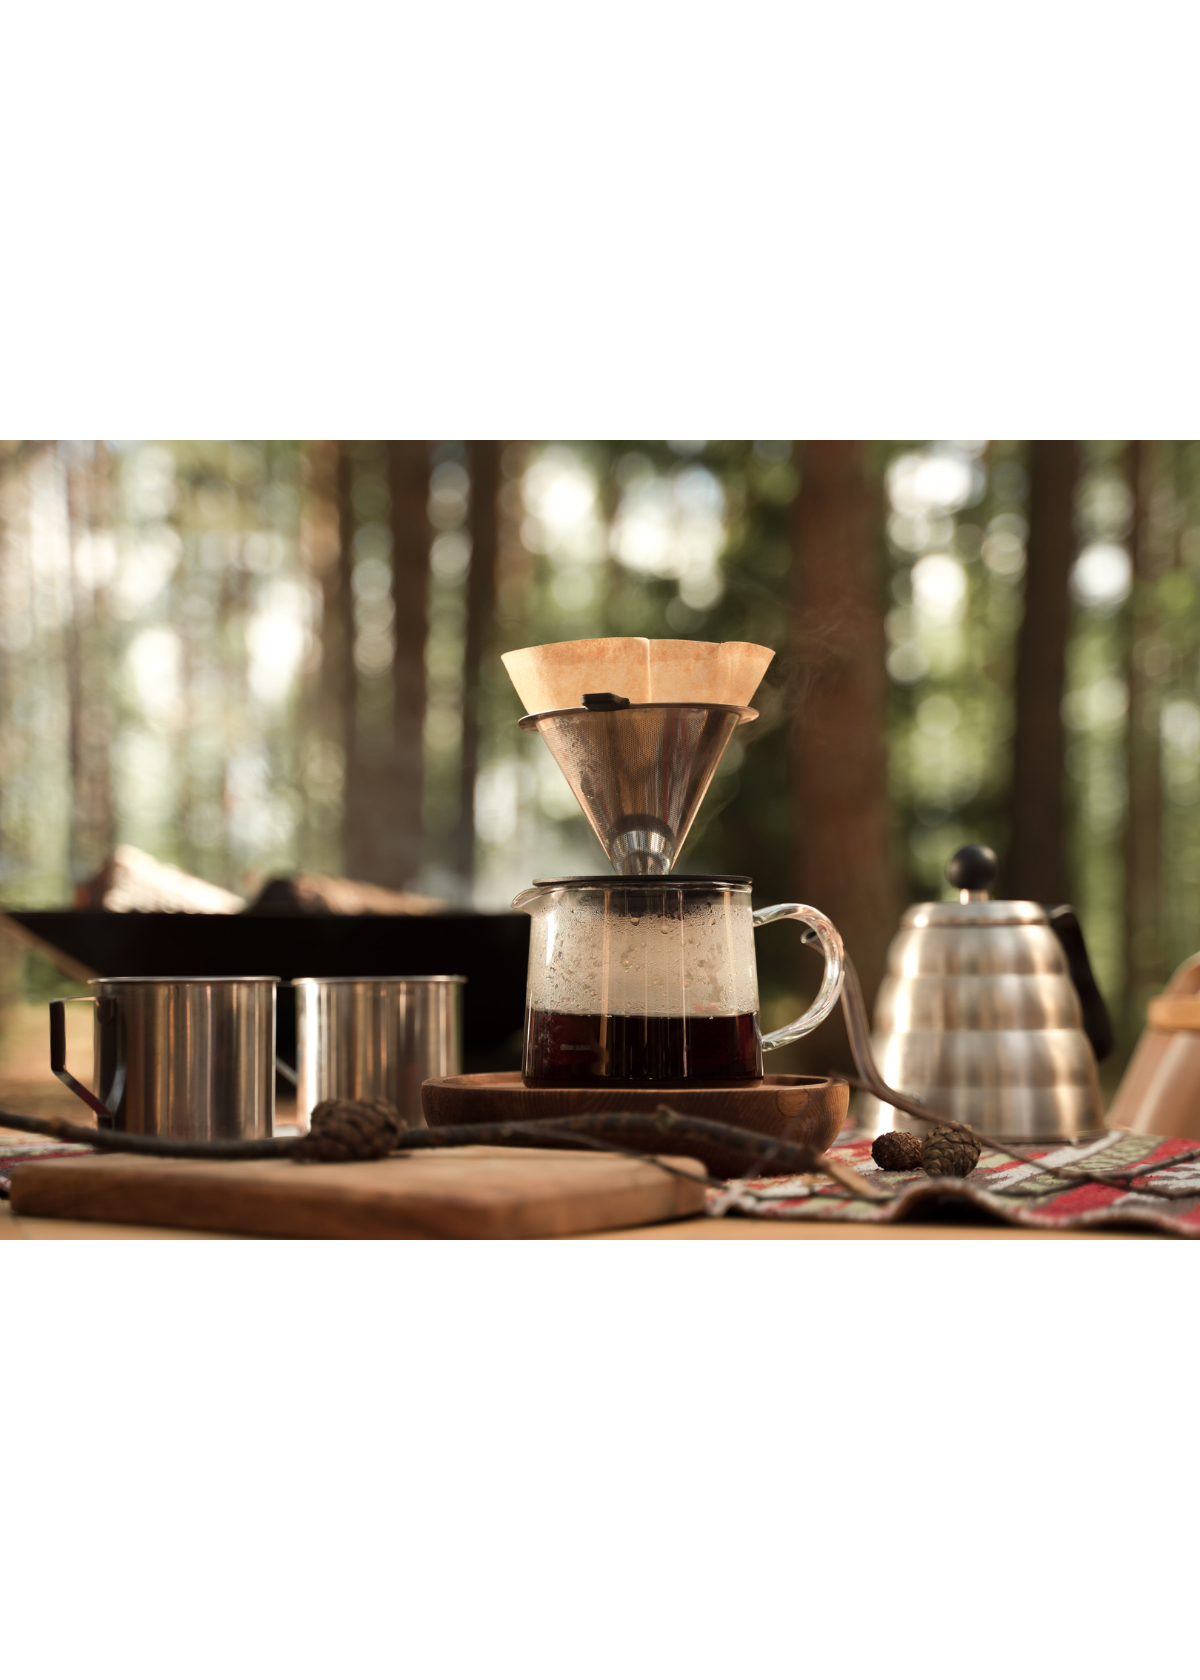 Brewing Bliss in the Wilderness: 5 Best Camping Coffee Maker Reviews